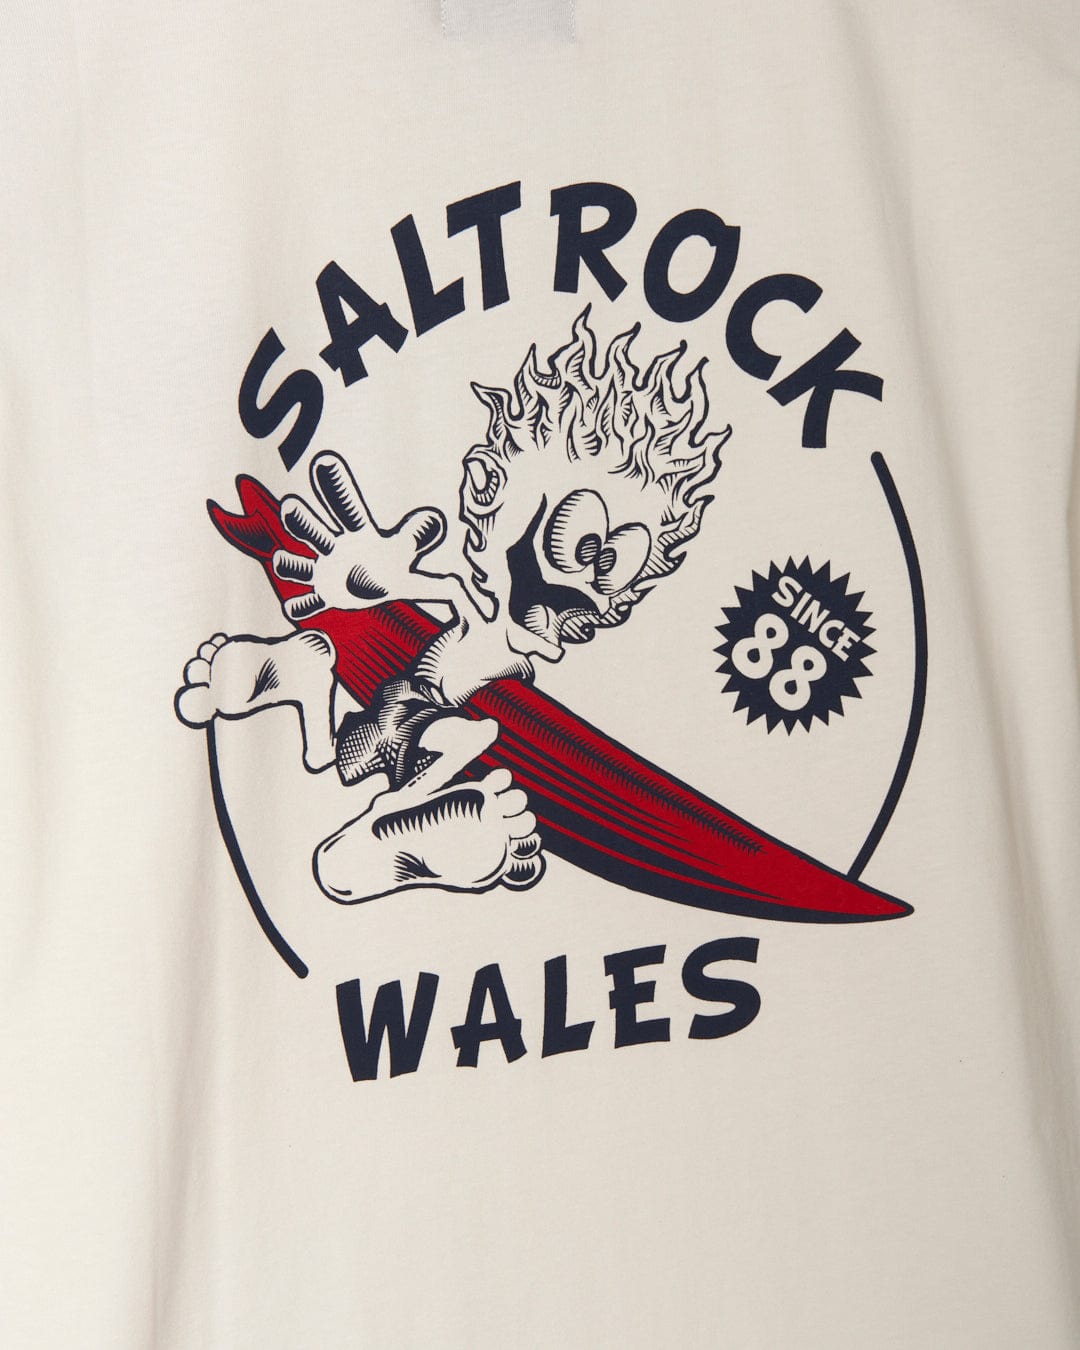 A **Saltrock** white t-shirt with branding that says Salt Rock Wales.